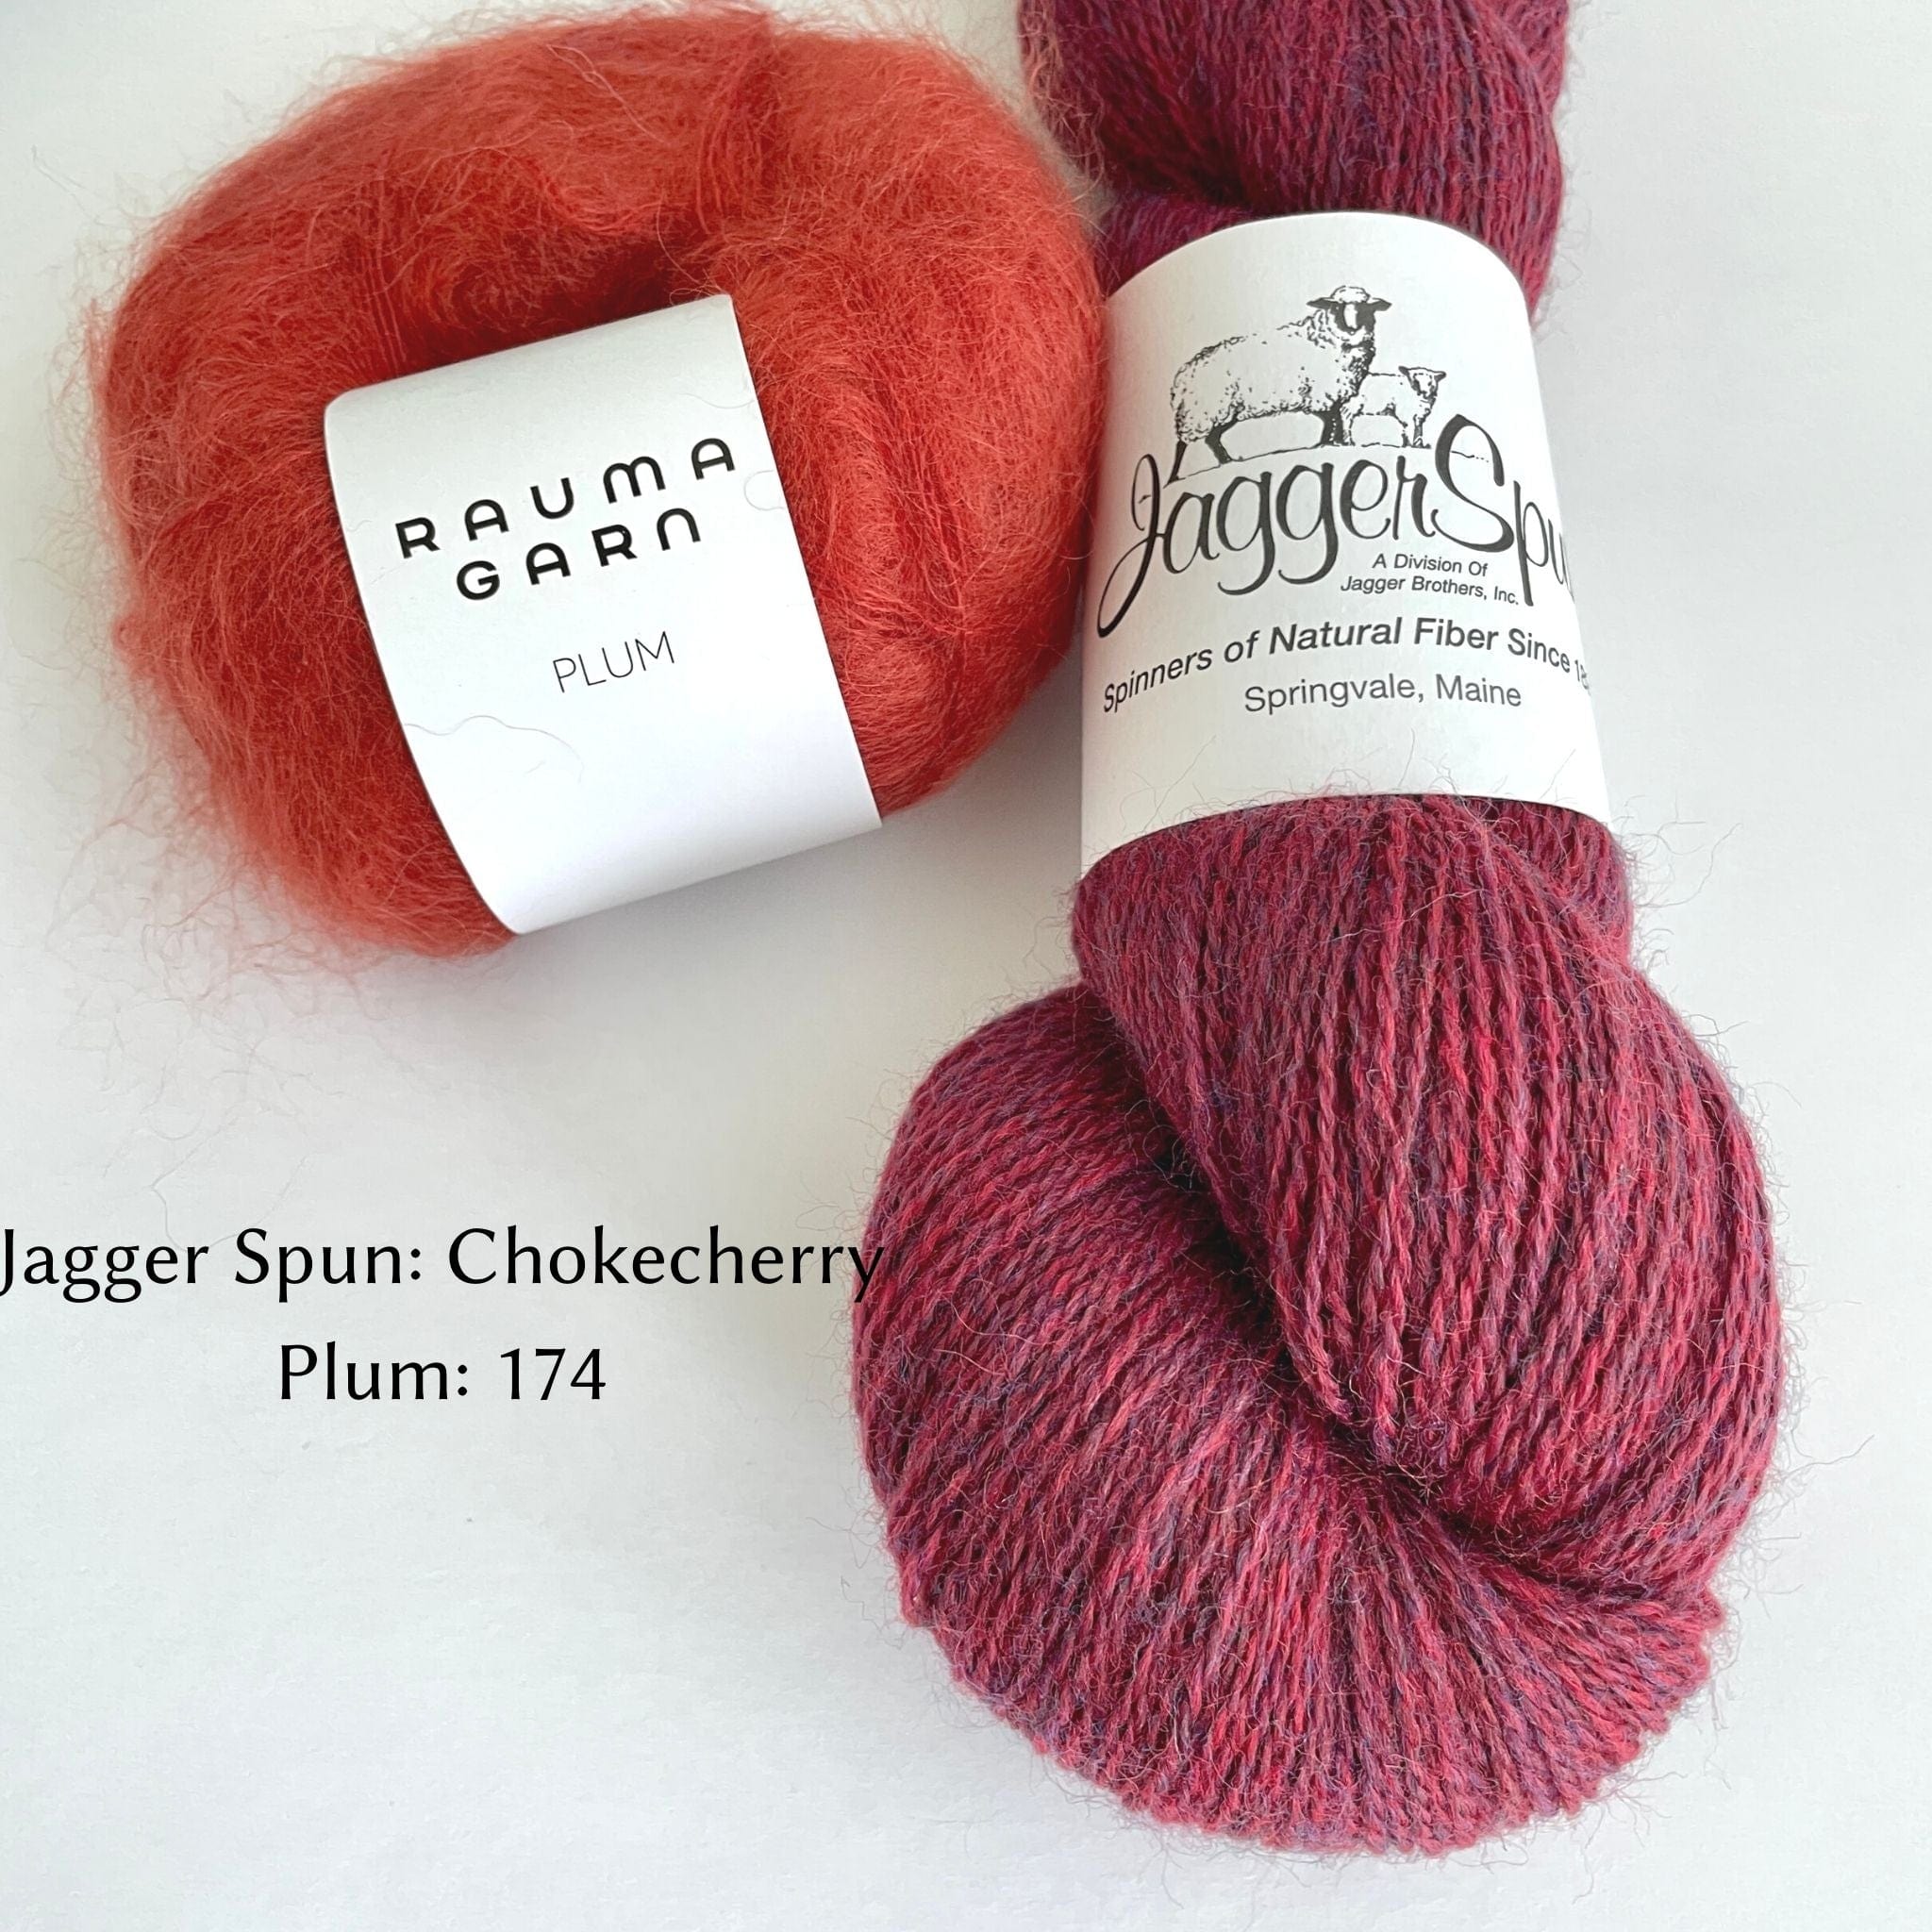 Deep Pink JaggerSpun Yarn paired with red/orange Rauma Plum Mohair for Love Note Sweater color option.  